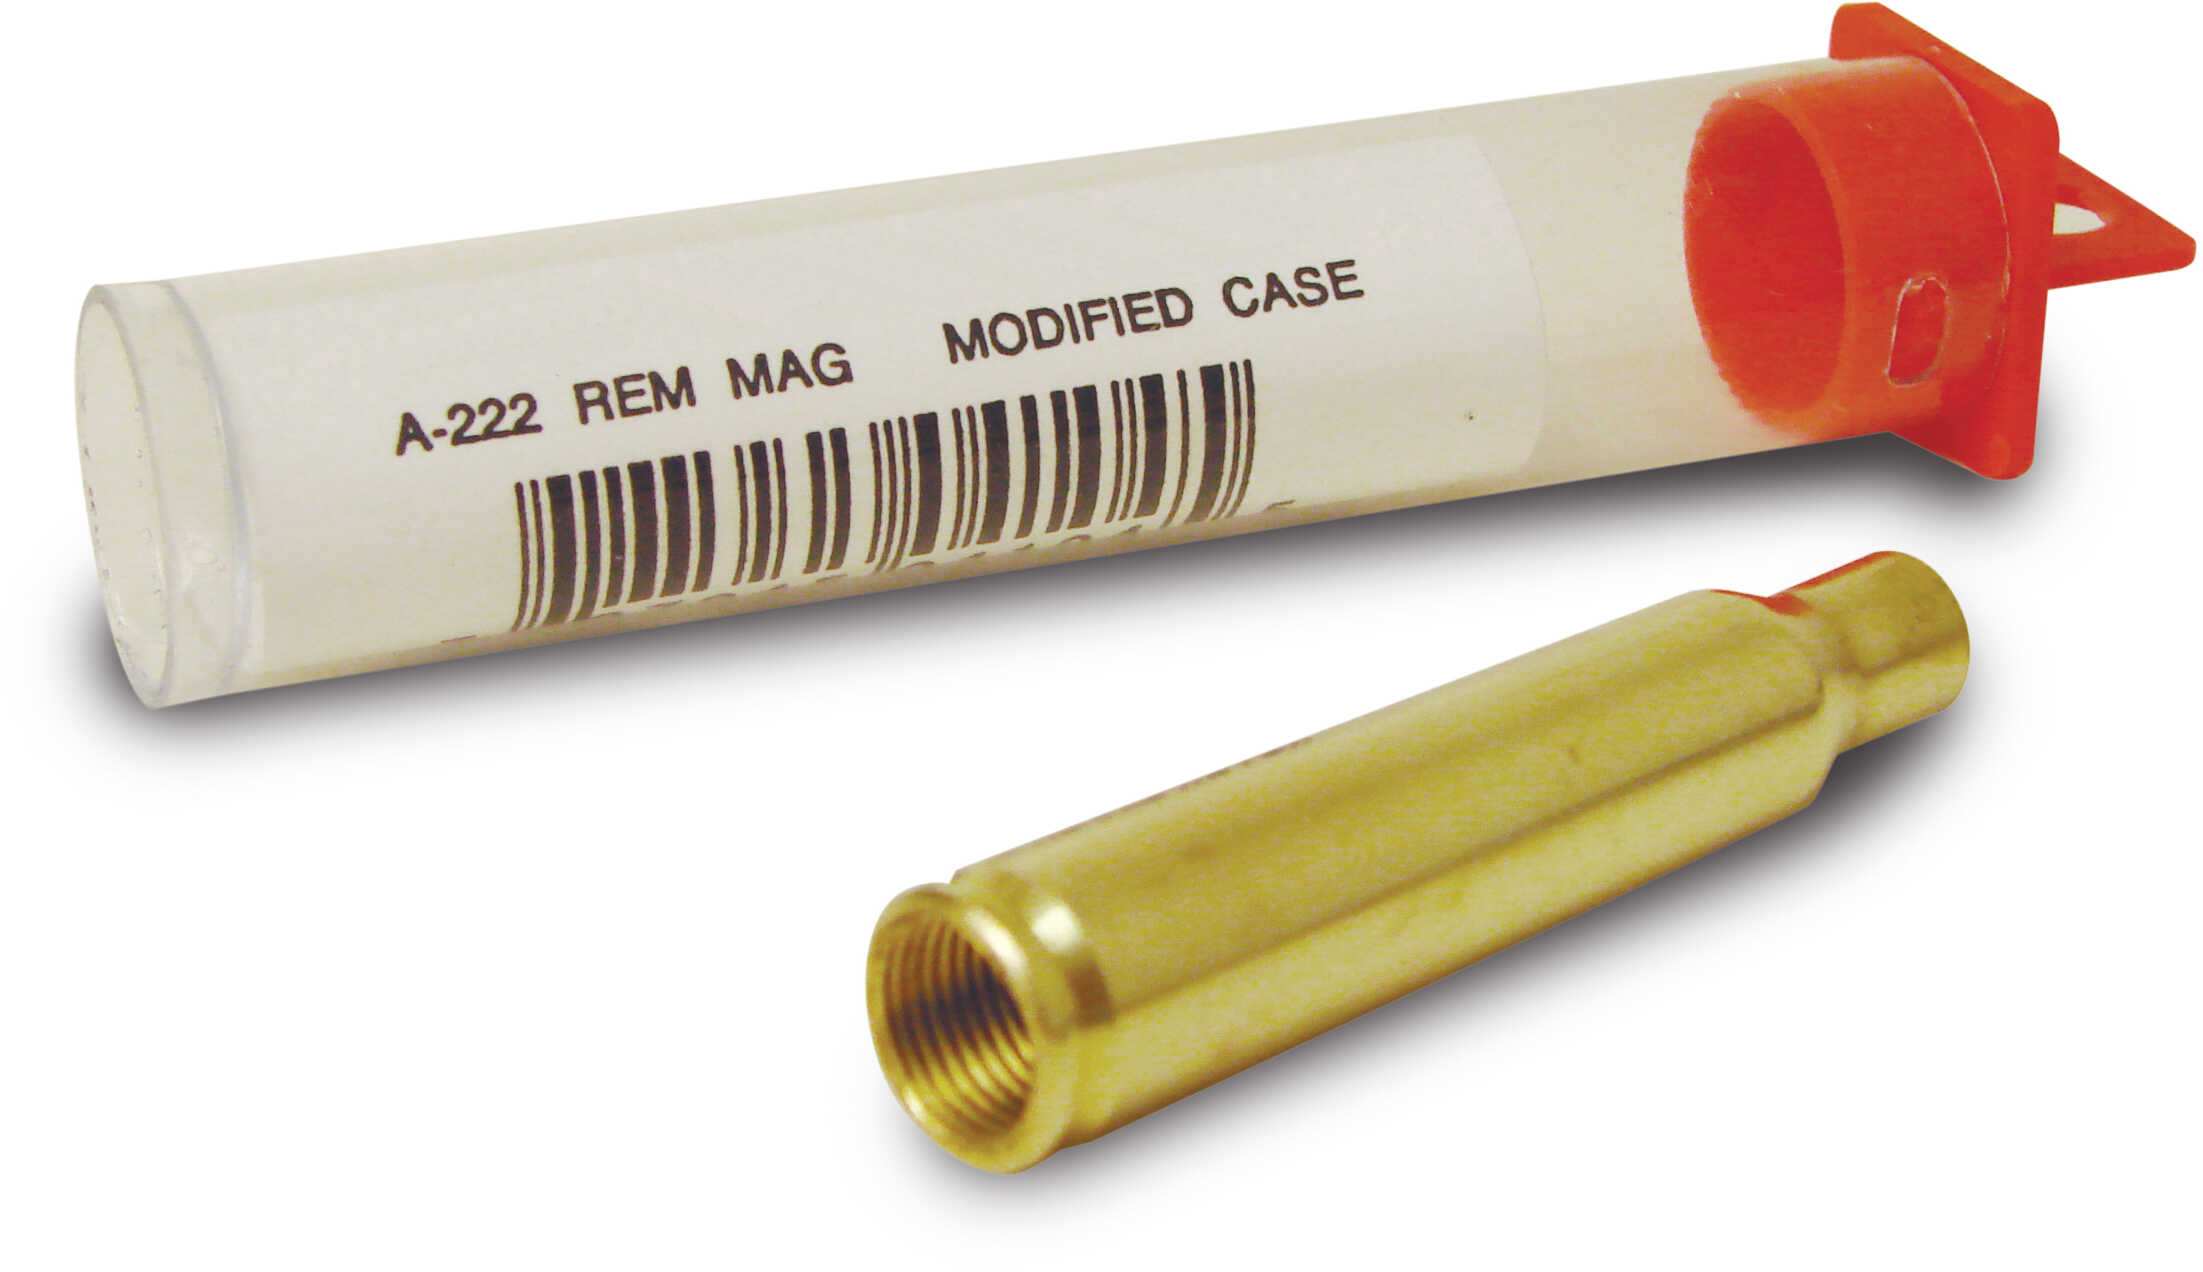 Hornady Lock-N-Load 204 Ruger® Modified Case, 1 Count Md: B204